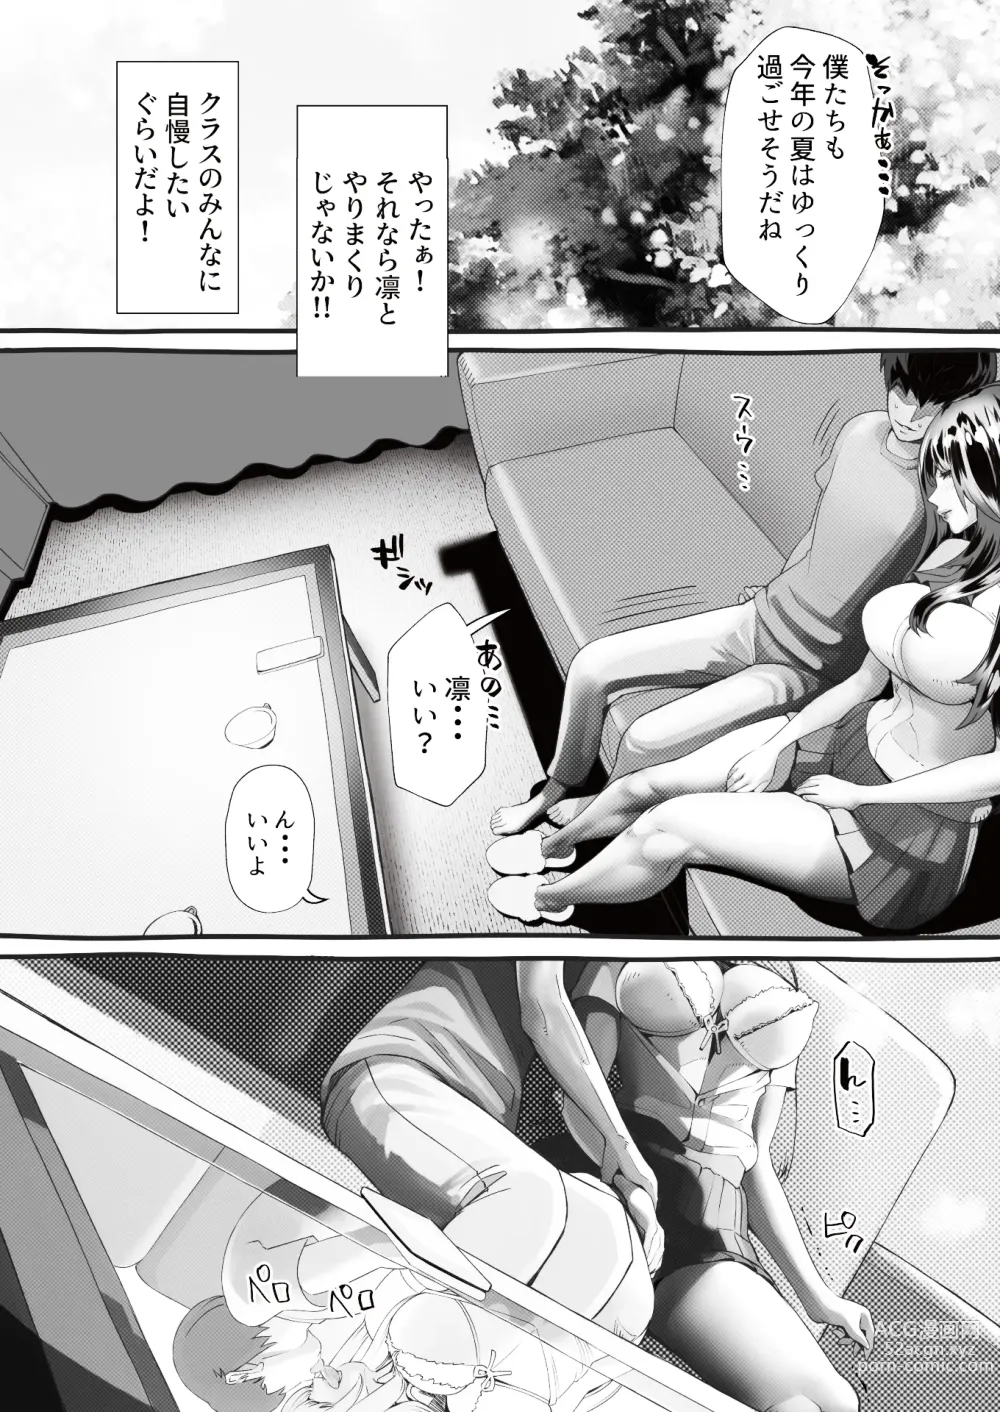 Page 7 of doujinshi 僕の彼女が他人棒で絶頂いたす